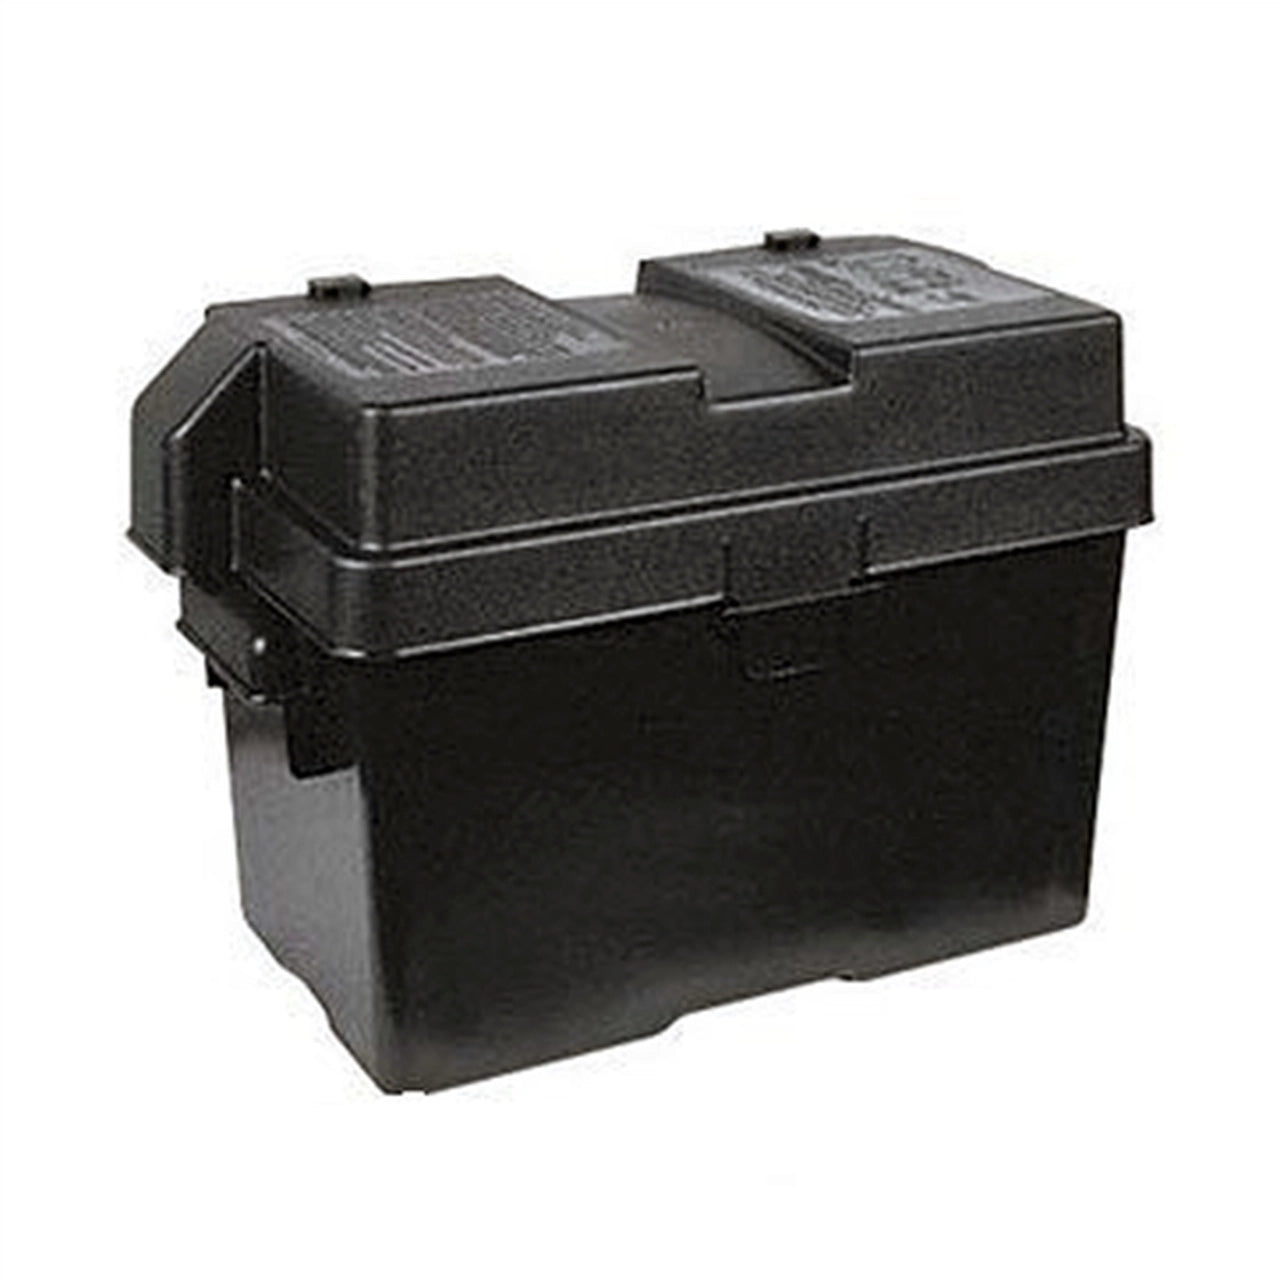 Aleko Set of Battery Box - LM130 for 22AH Batteries and Two